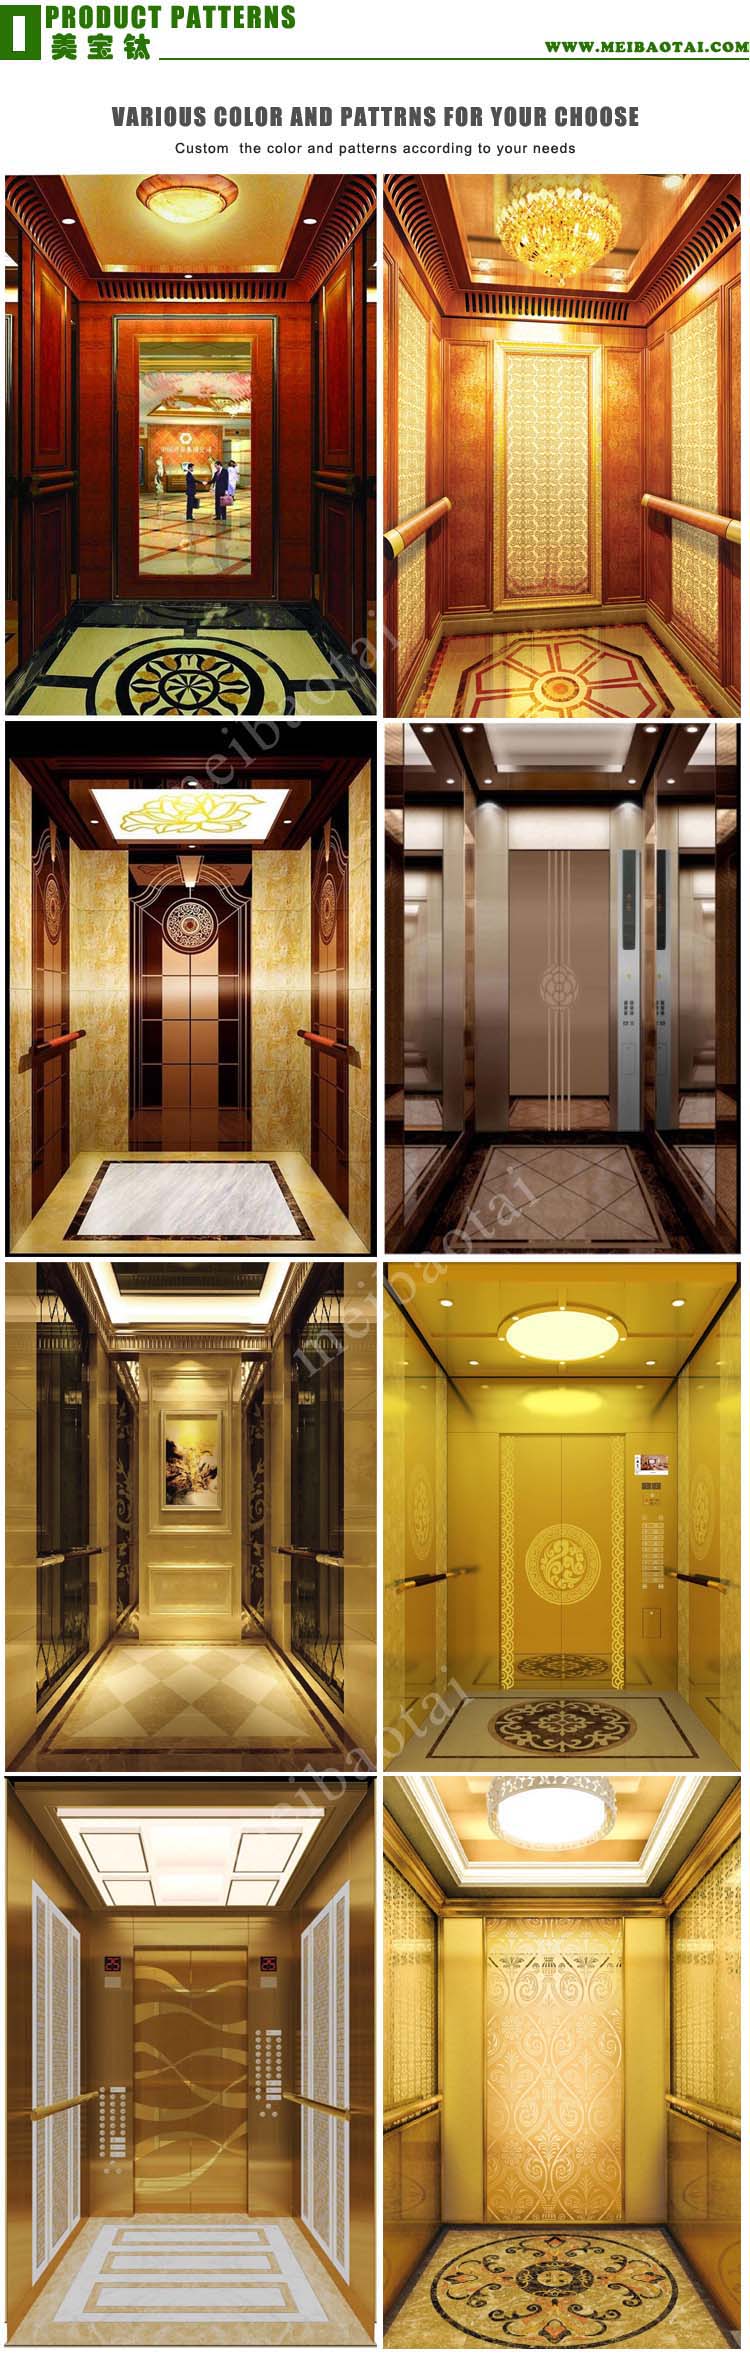 elevator_products_patterns